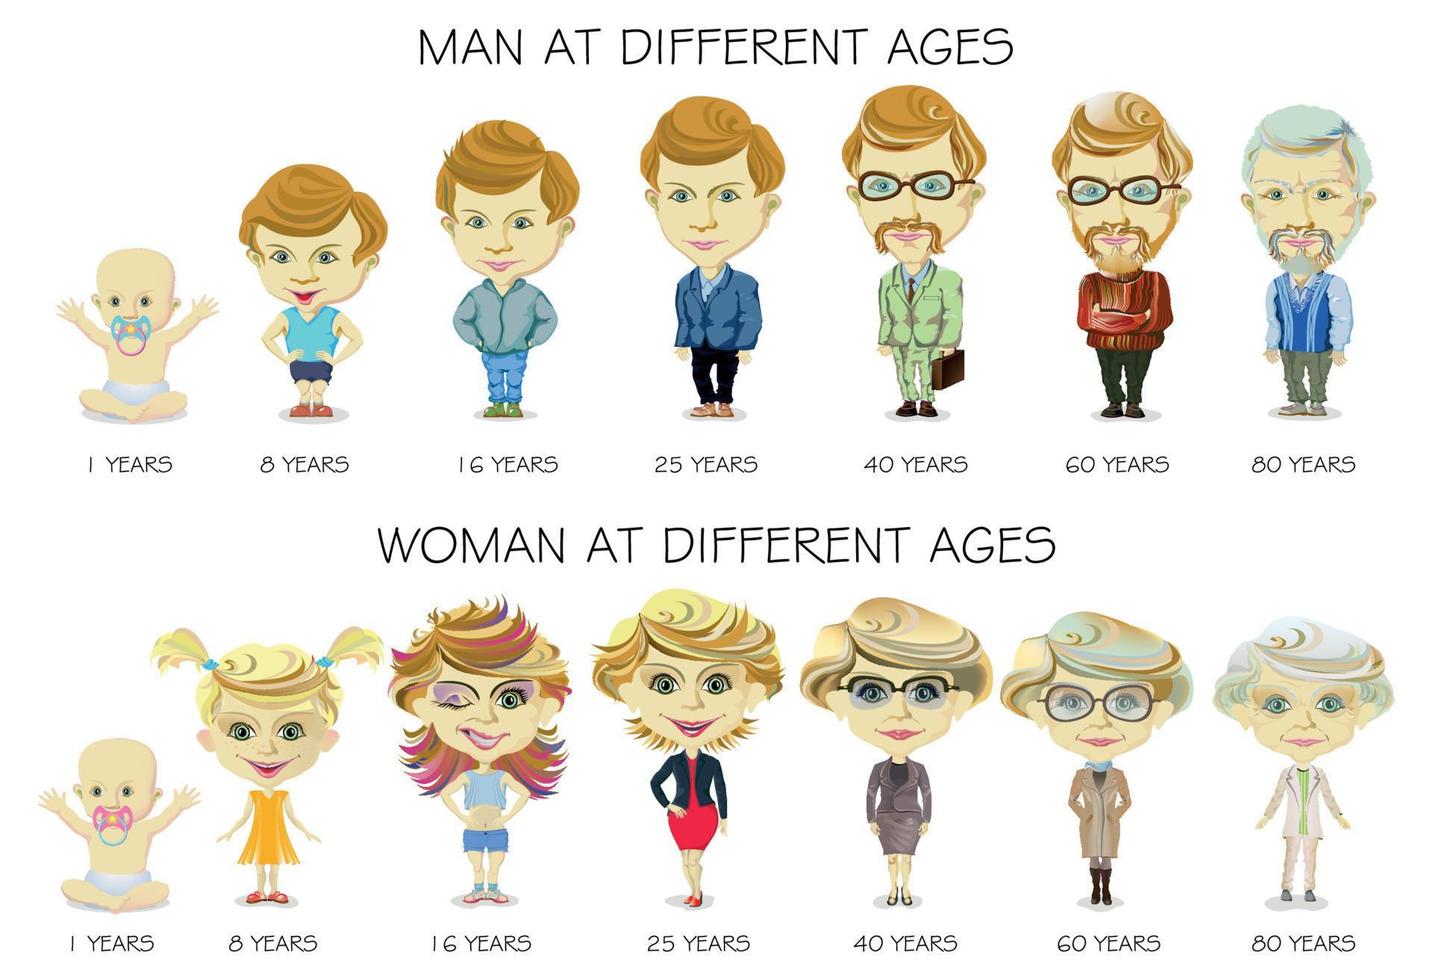 People generations at different ages. Circle of life from youth to old age. Man and woman aging concept. Baby, child, teenager, young, adult, old people. Vector illustration.